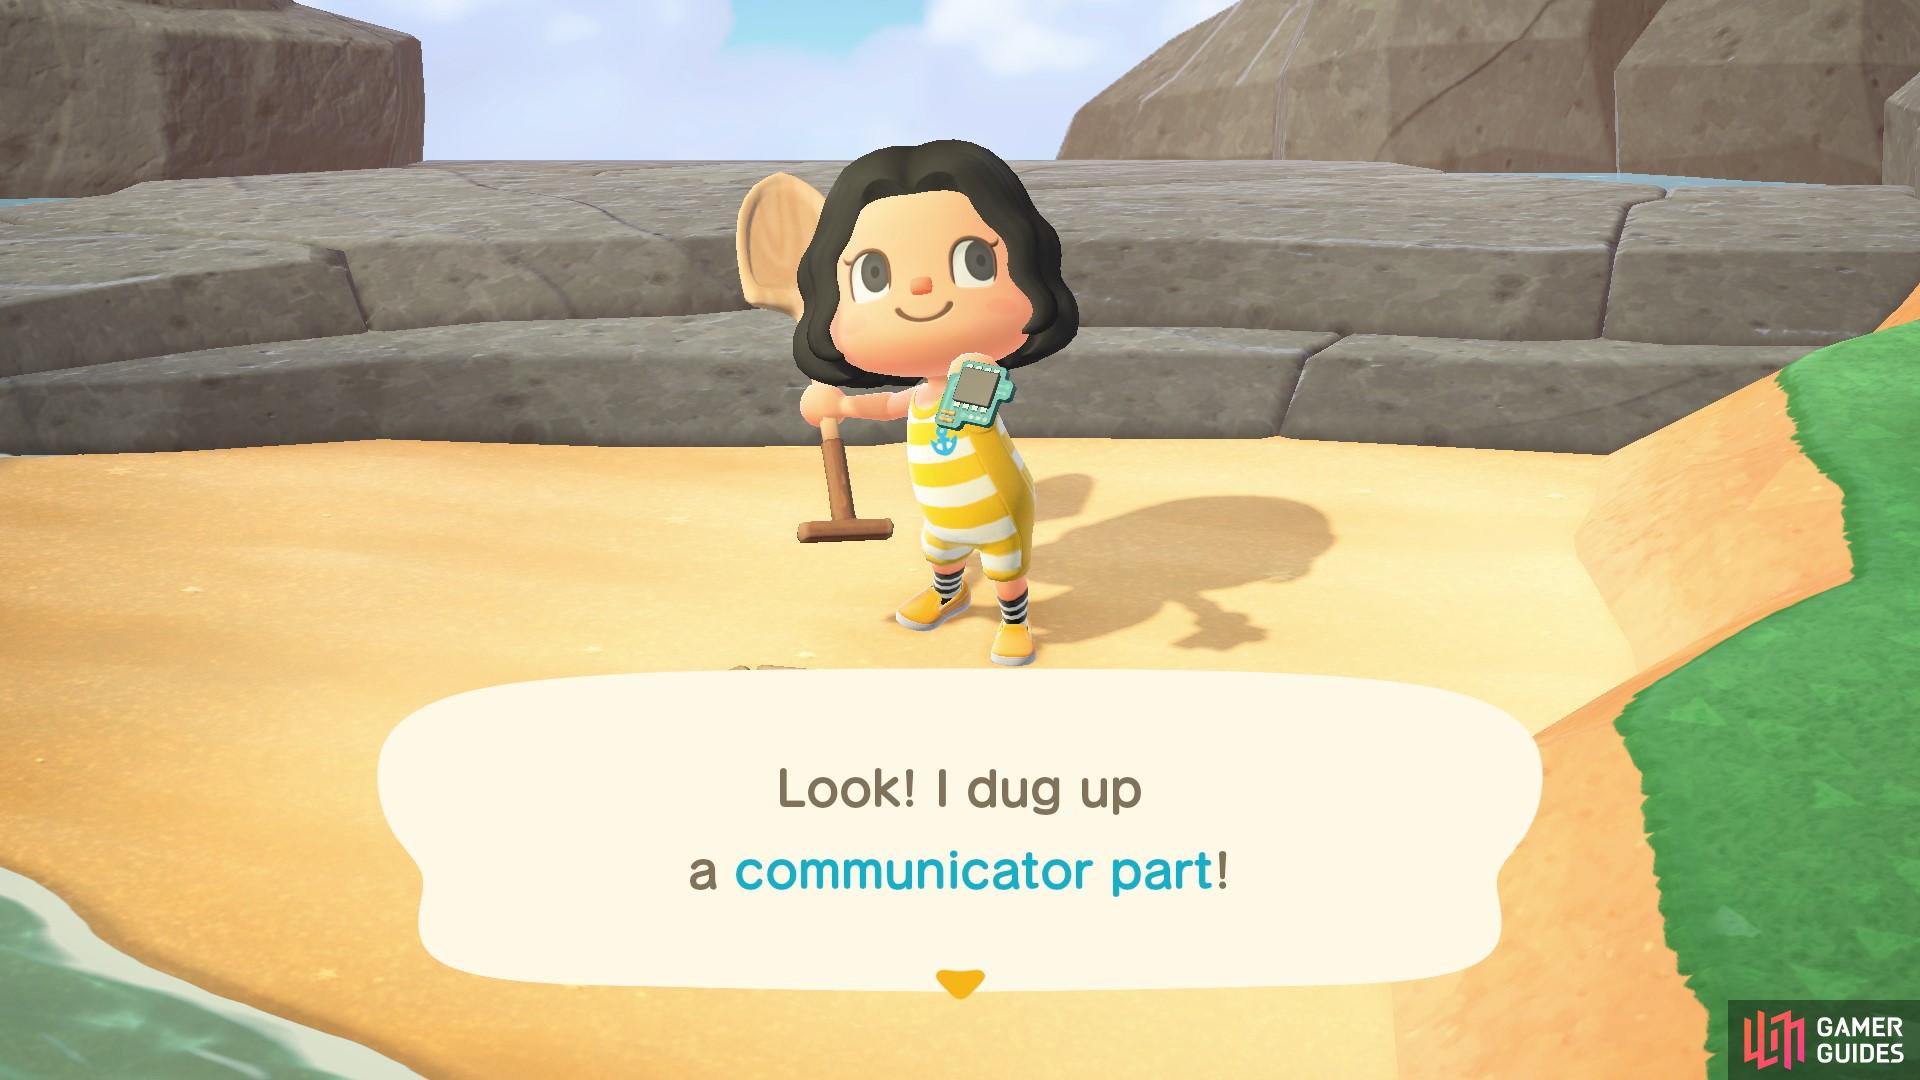 You need to dig up 5 communicator parts to fix Gulliver’s phone.